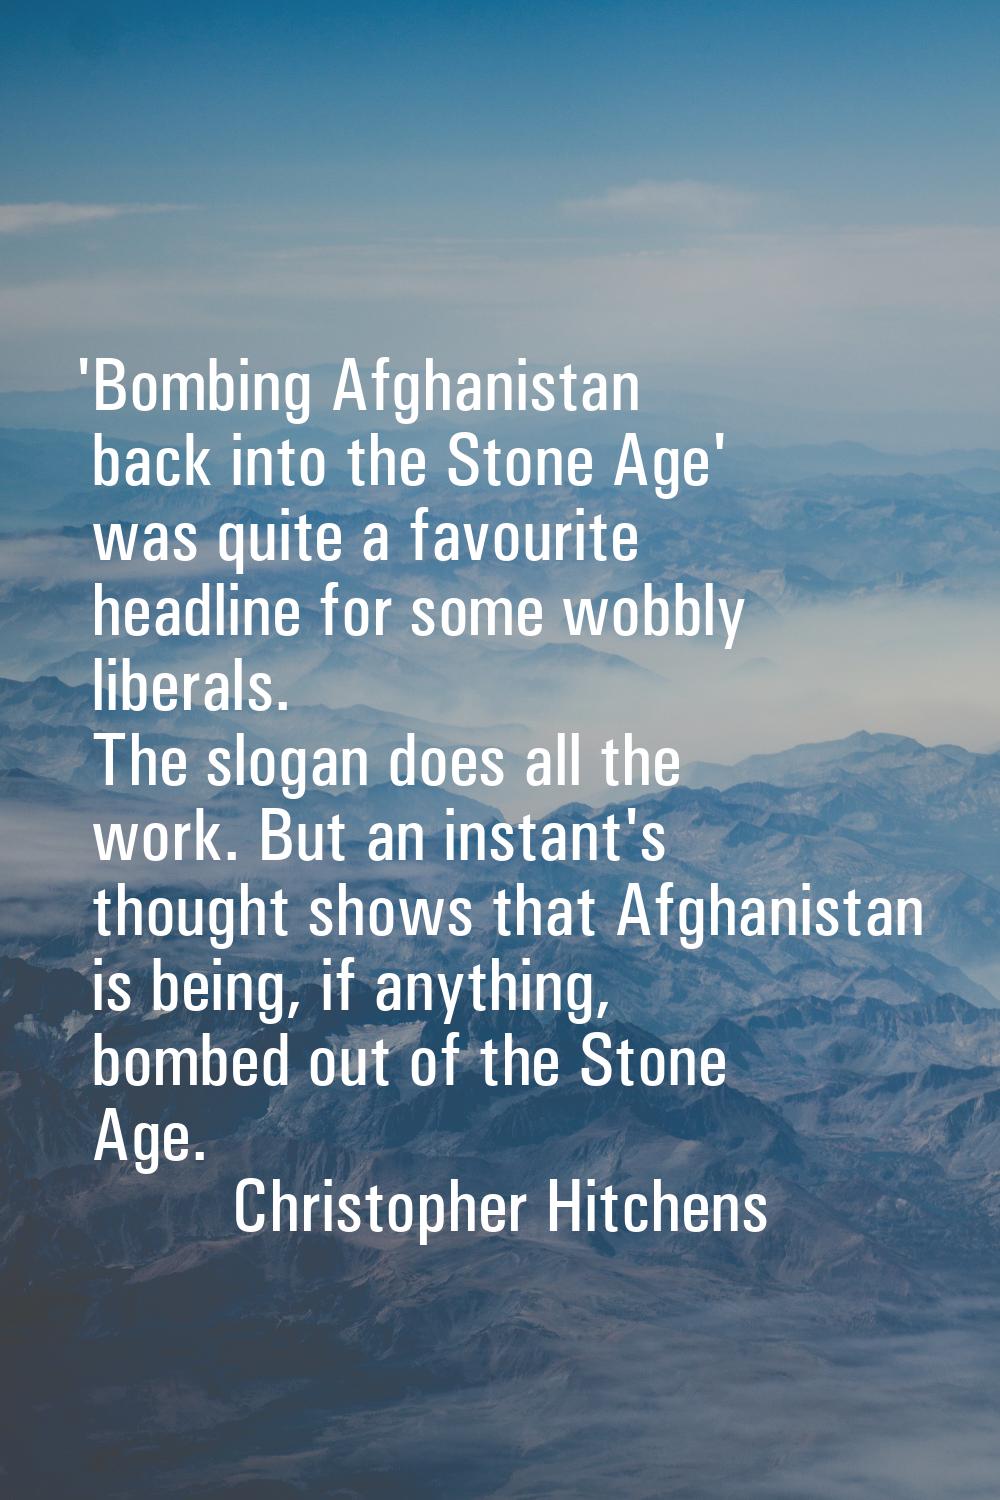 'Bombing Afghanistan back into the Stone Age' was quite a favourite headline for some wobbly libera